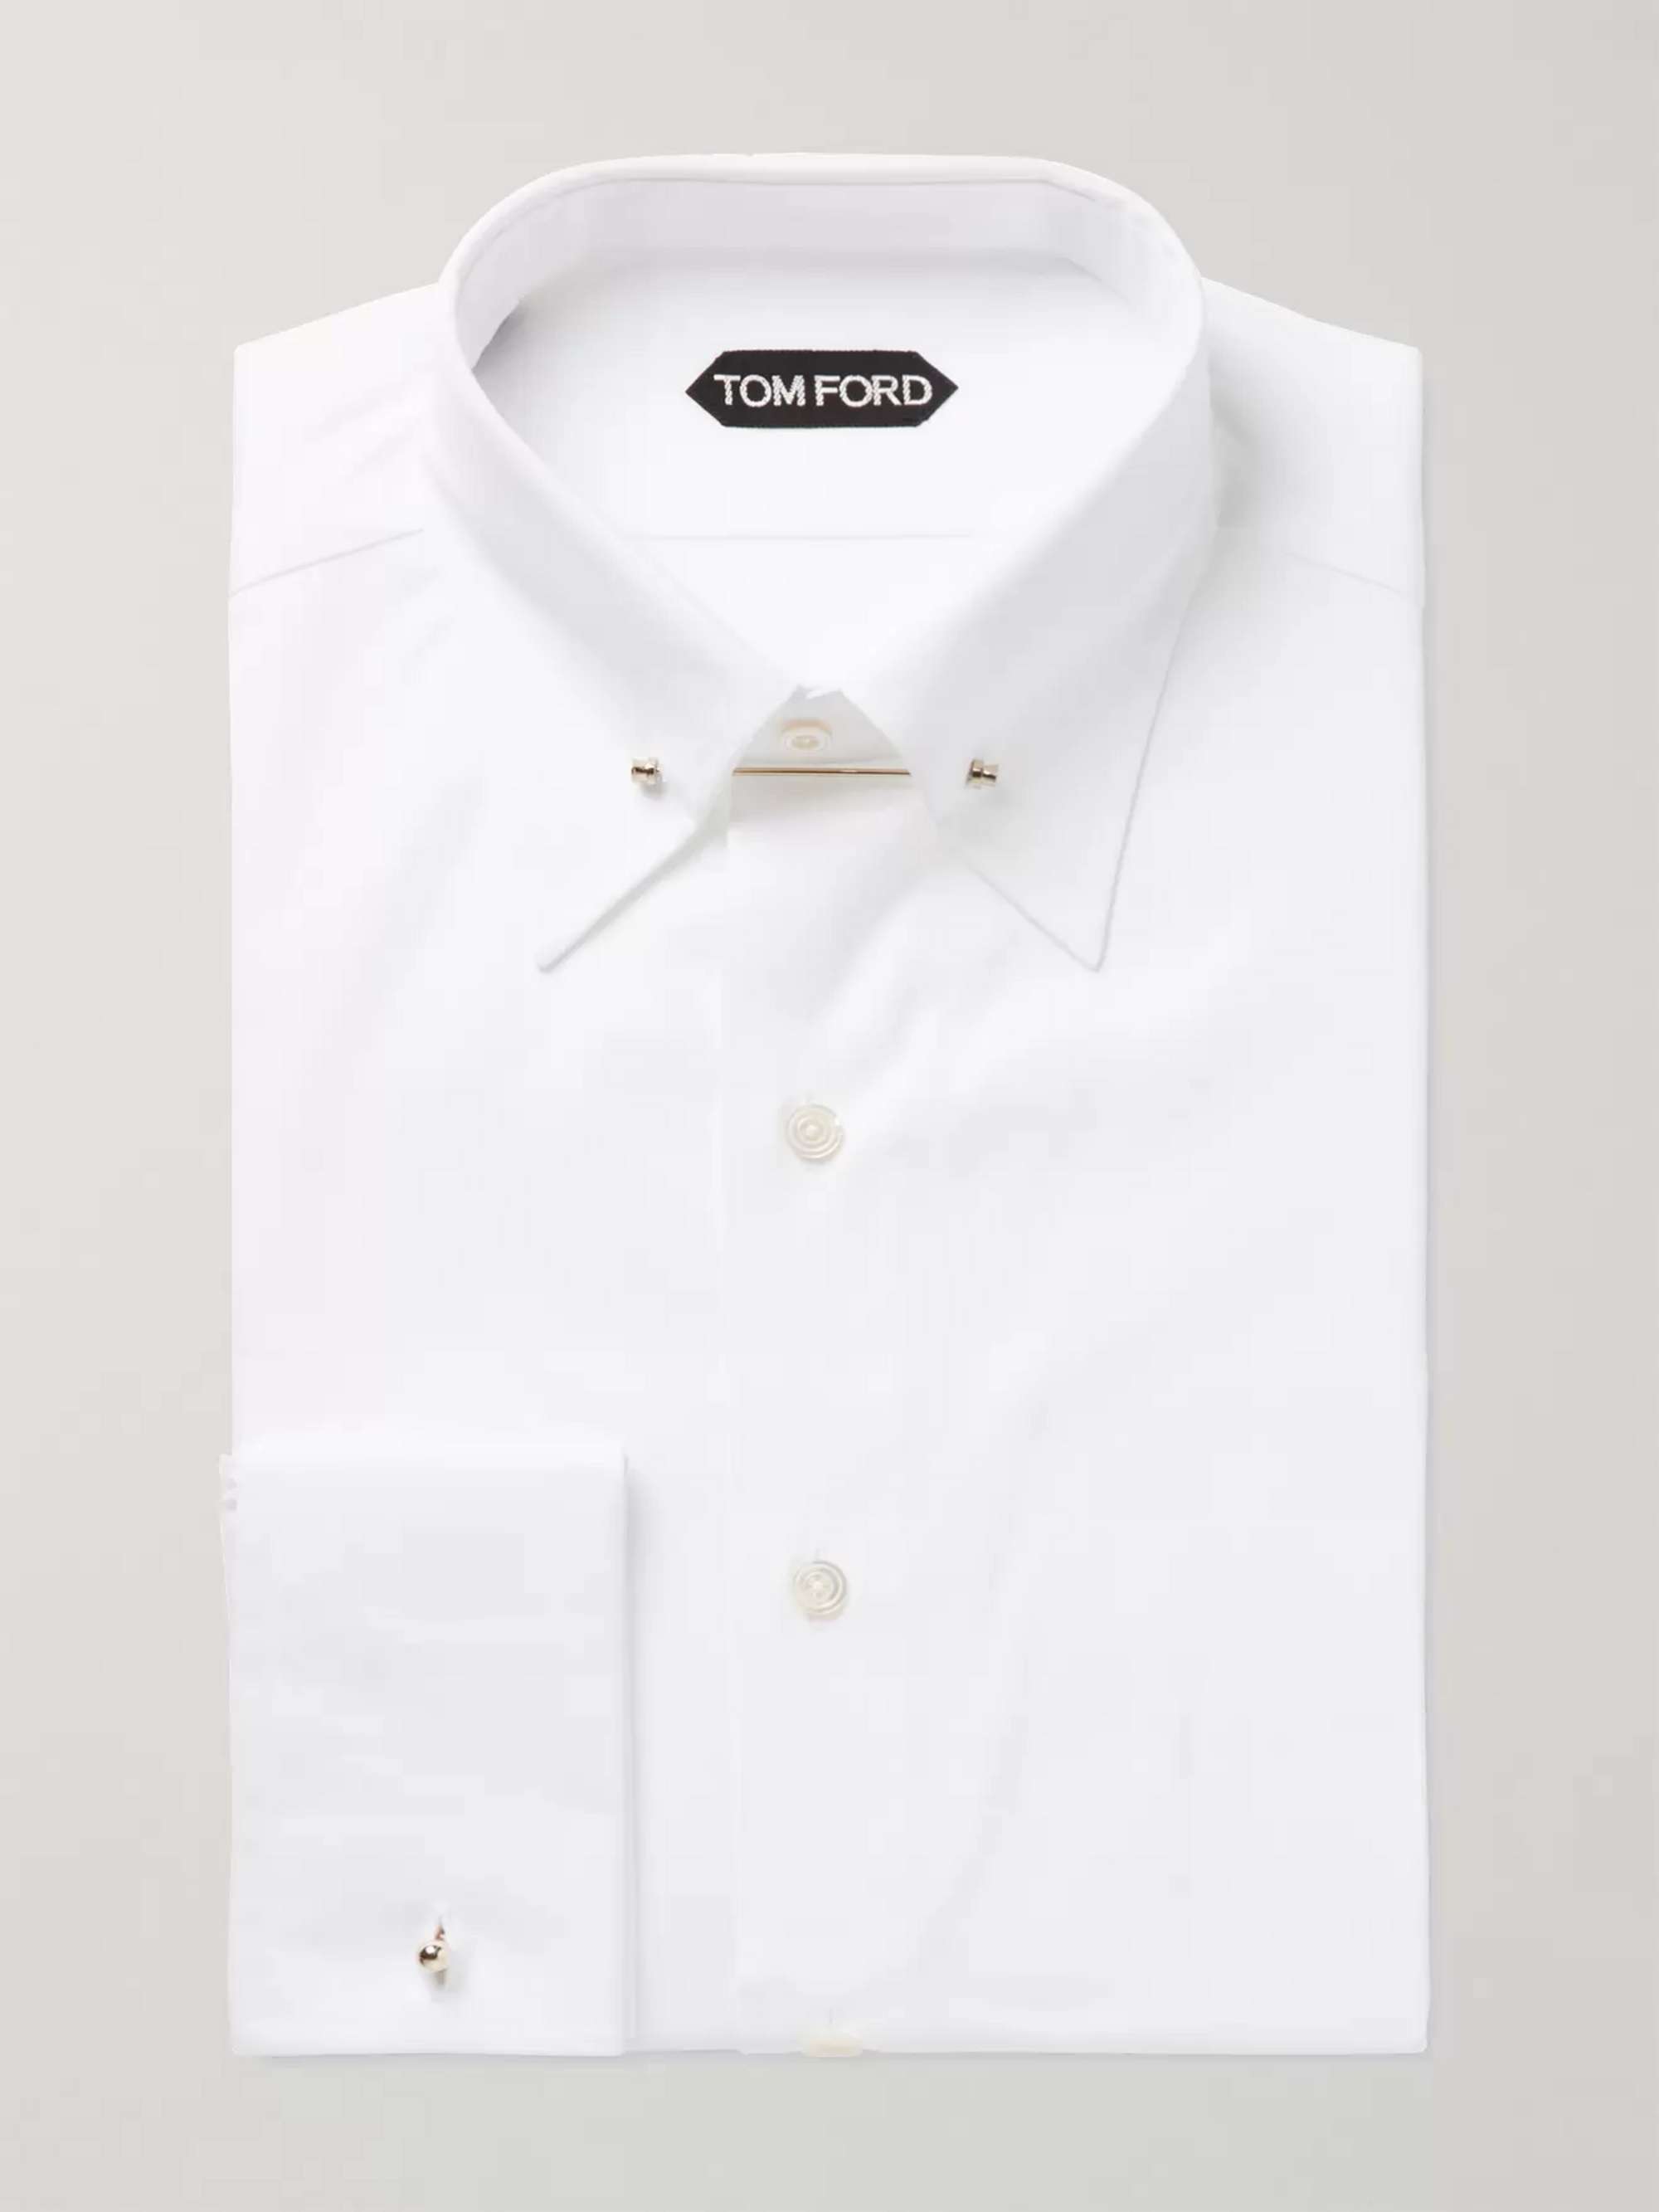 Mens Clothing Shirts Formal shirts Tom Ford Poplin Buttoned Shirt in White for Men 